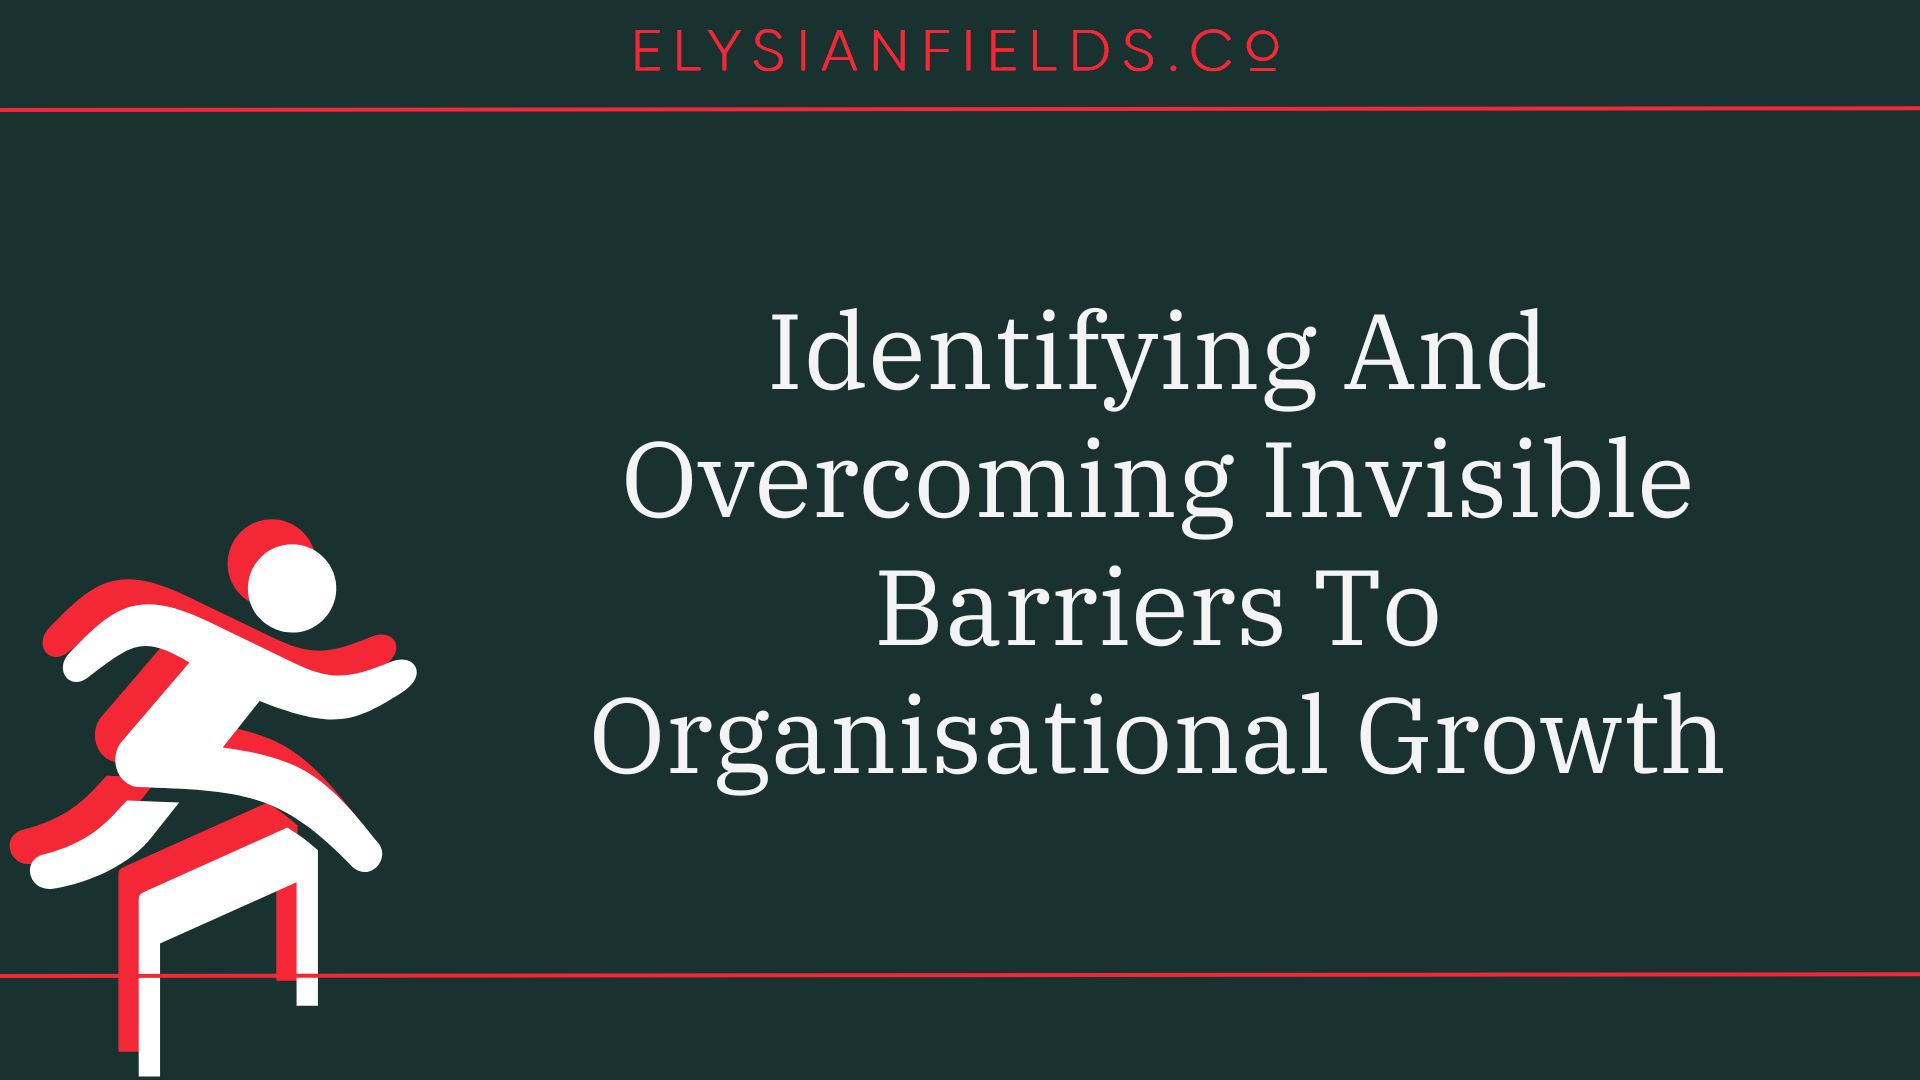 Identifying And Overcoming Invisible Barriers To Organizational Growth Featured Image